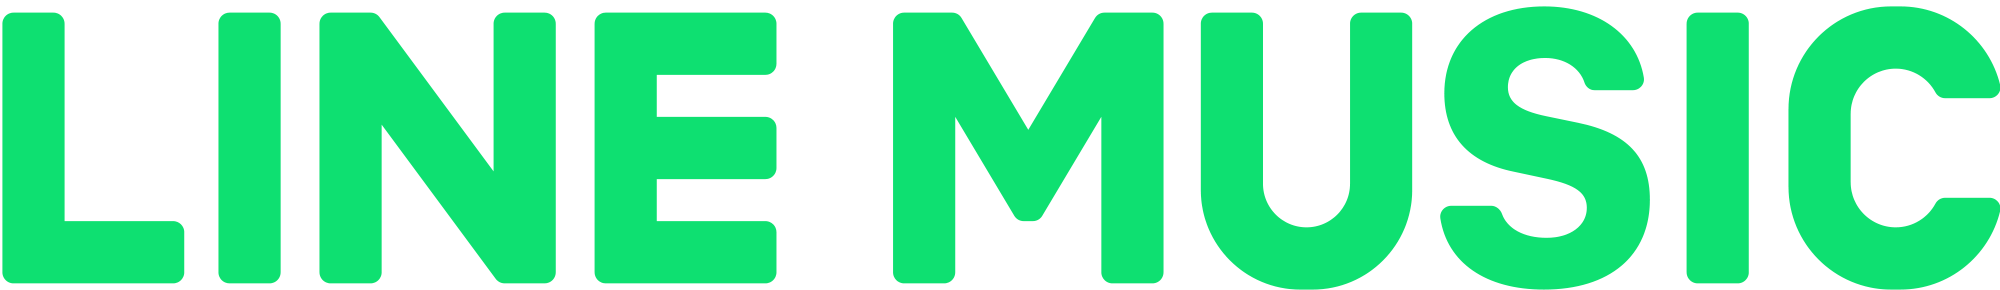 LINE_MUSIC_Logo_text_green.png